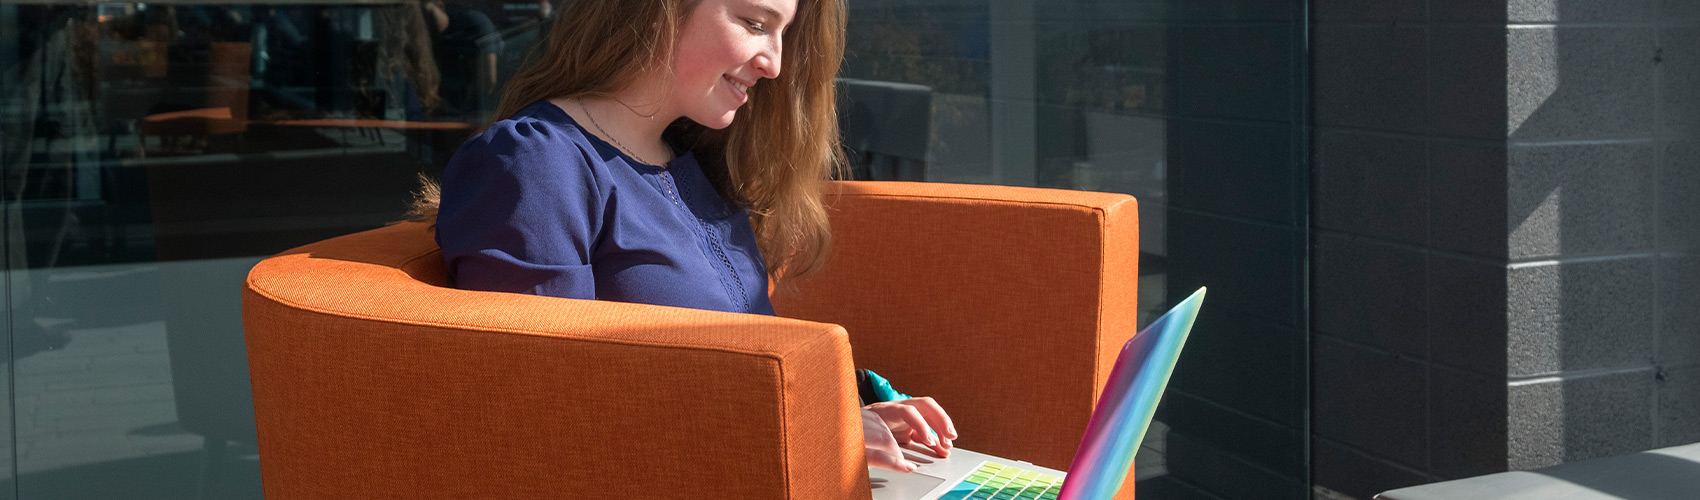 female student using a laptop and sitting in an orange lounge chair